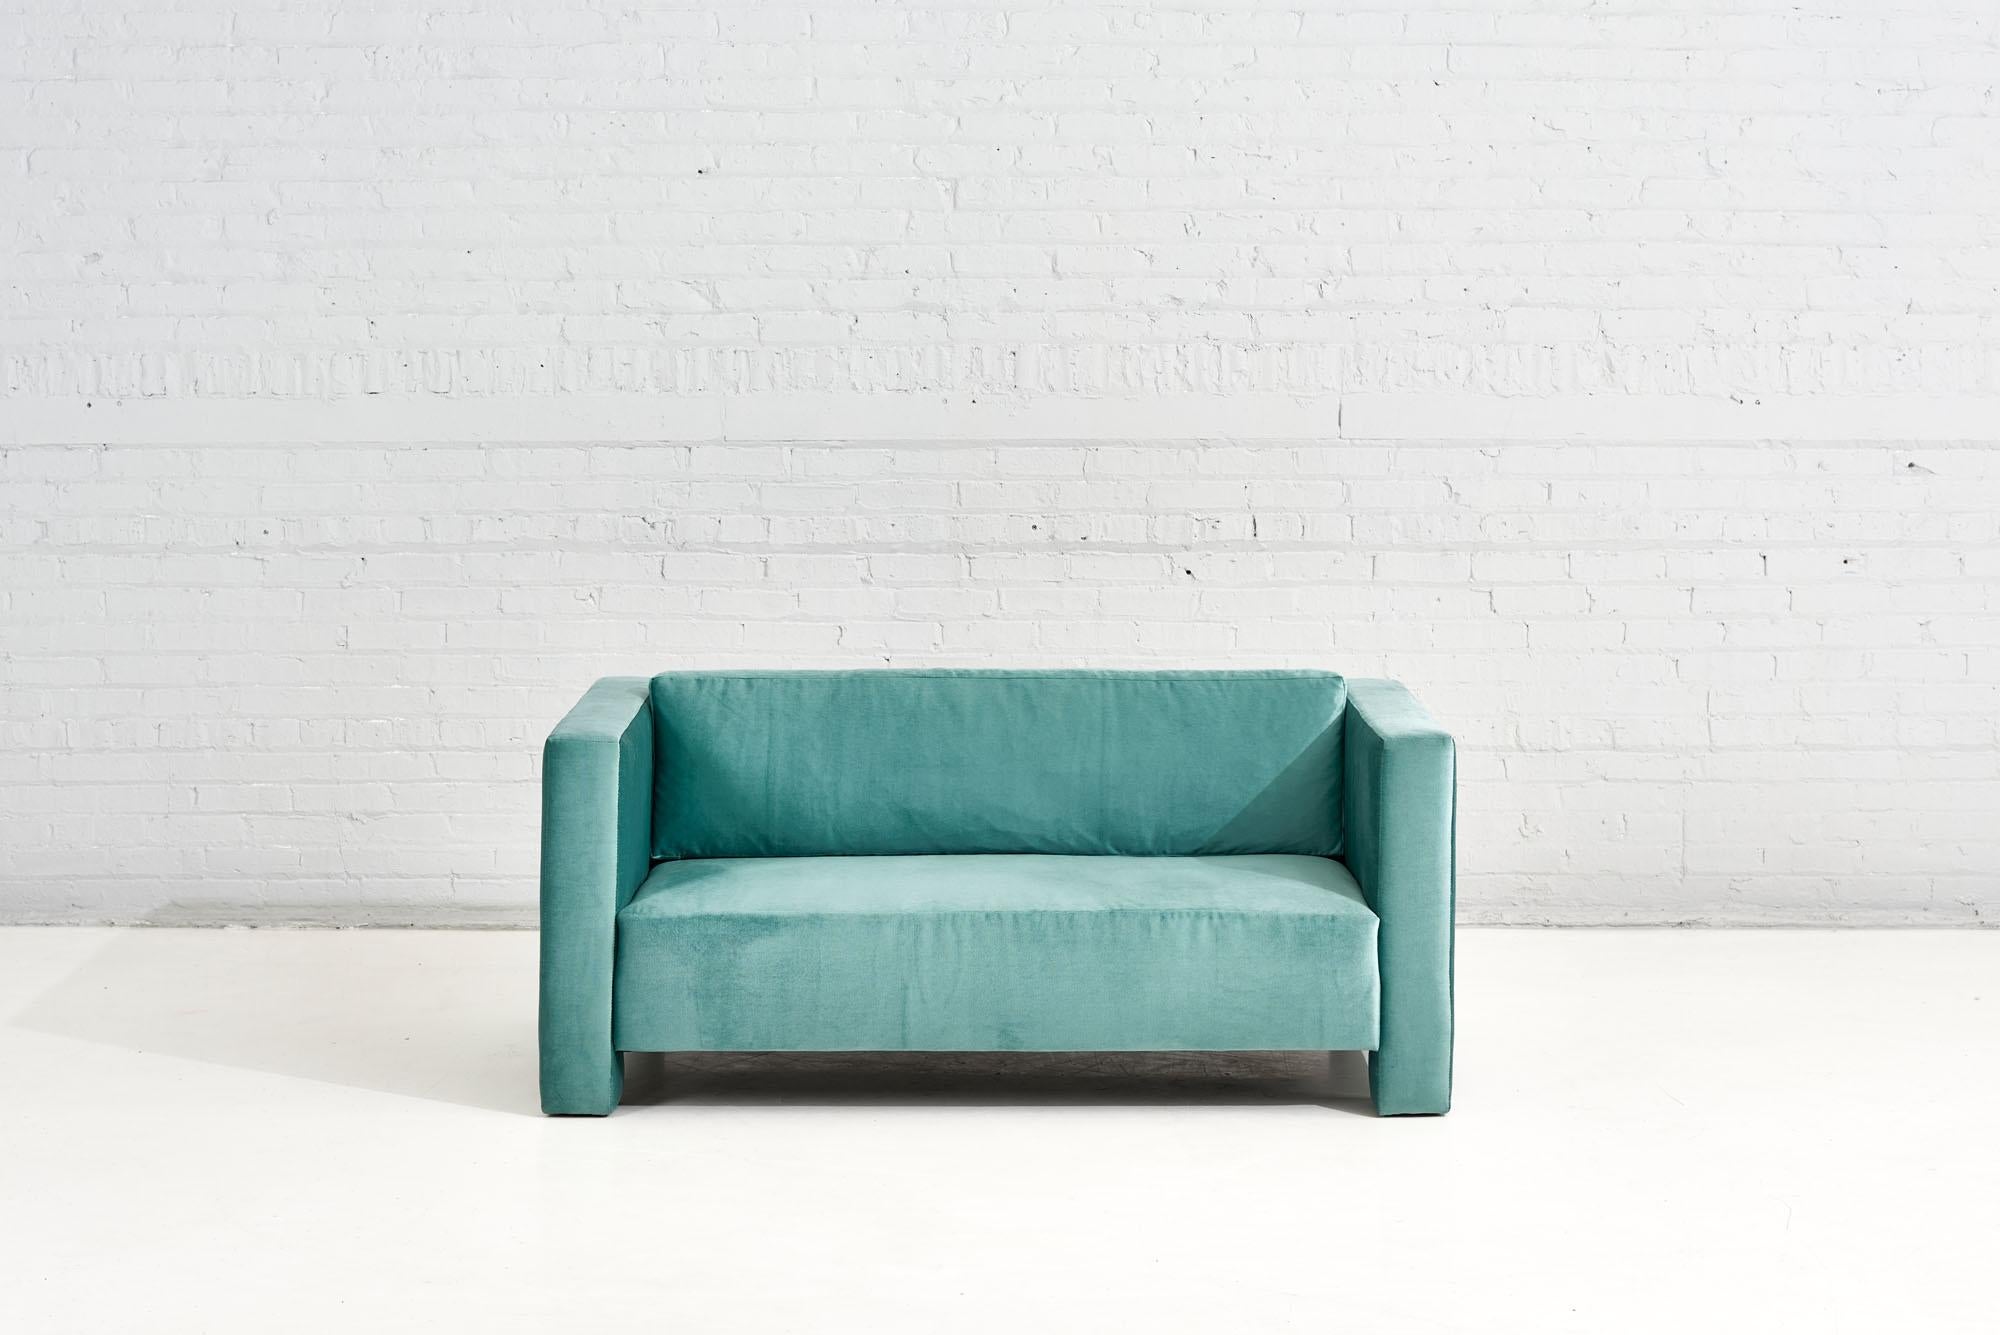 Turquoise Postmodern Cubic settee, 1970 Newly reupholstered in turquoise velvet.